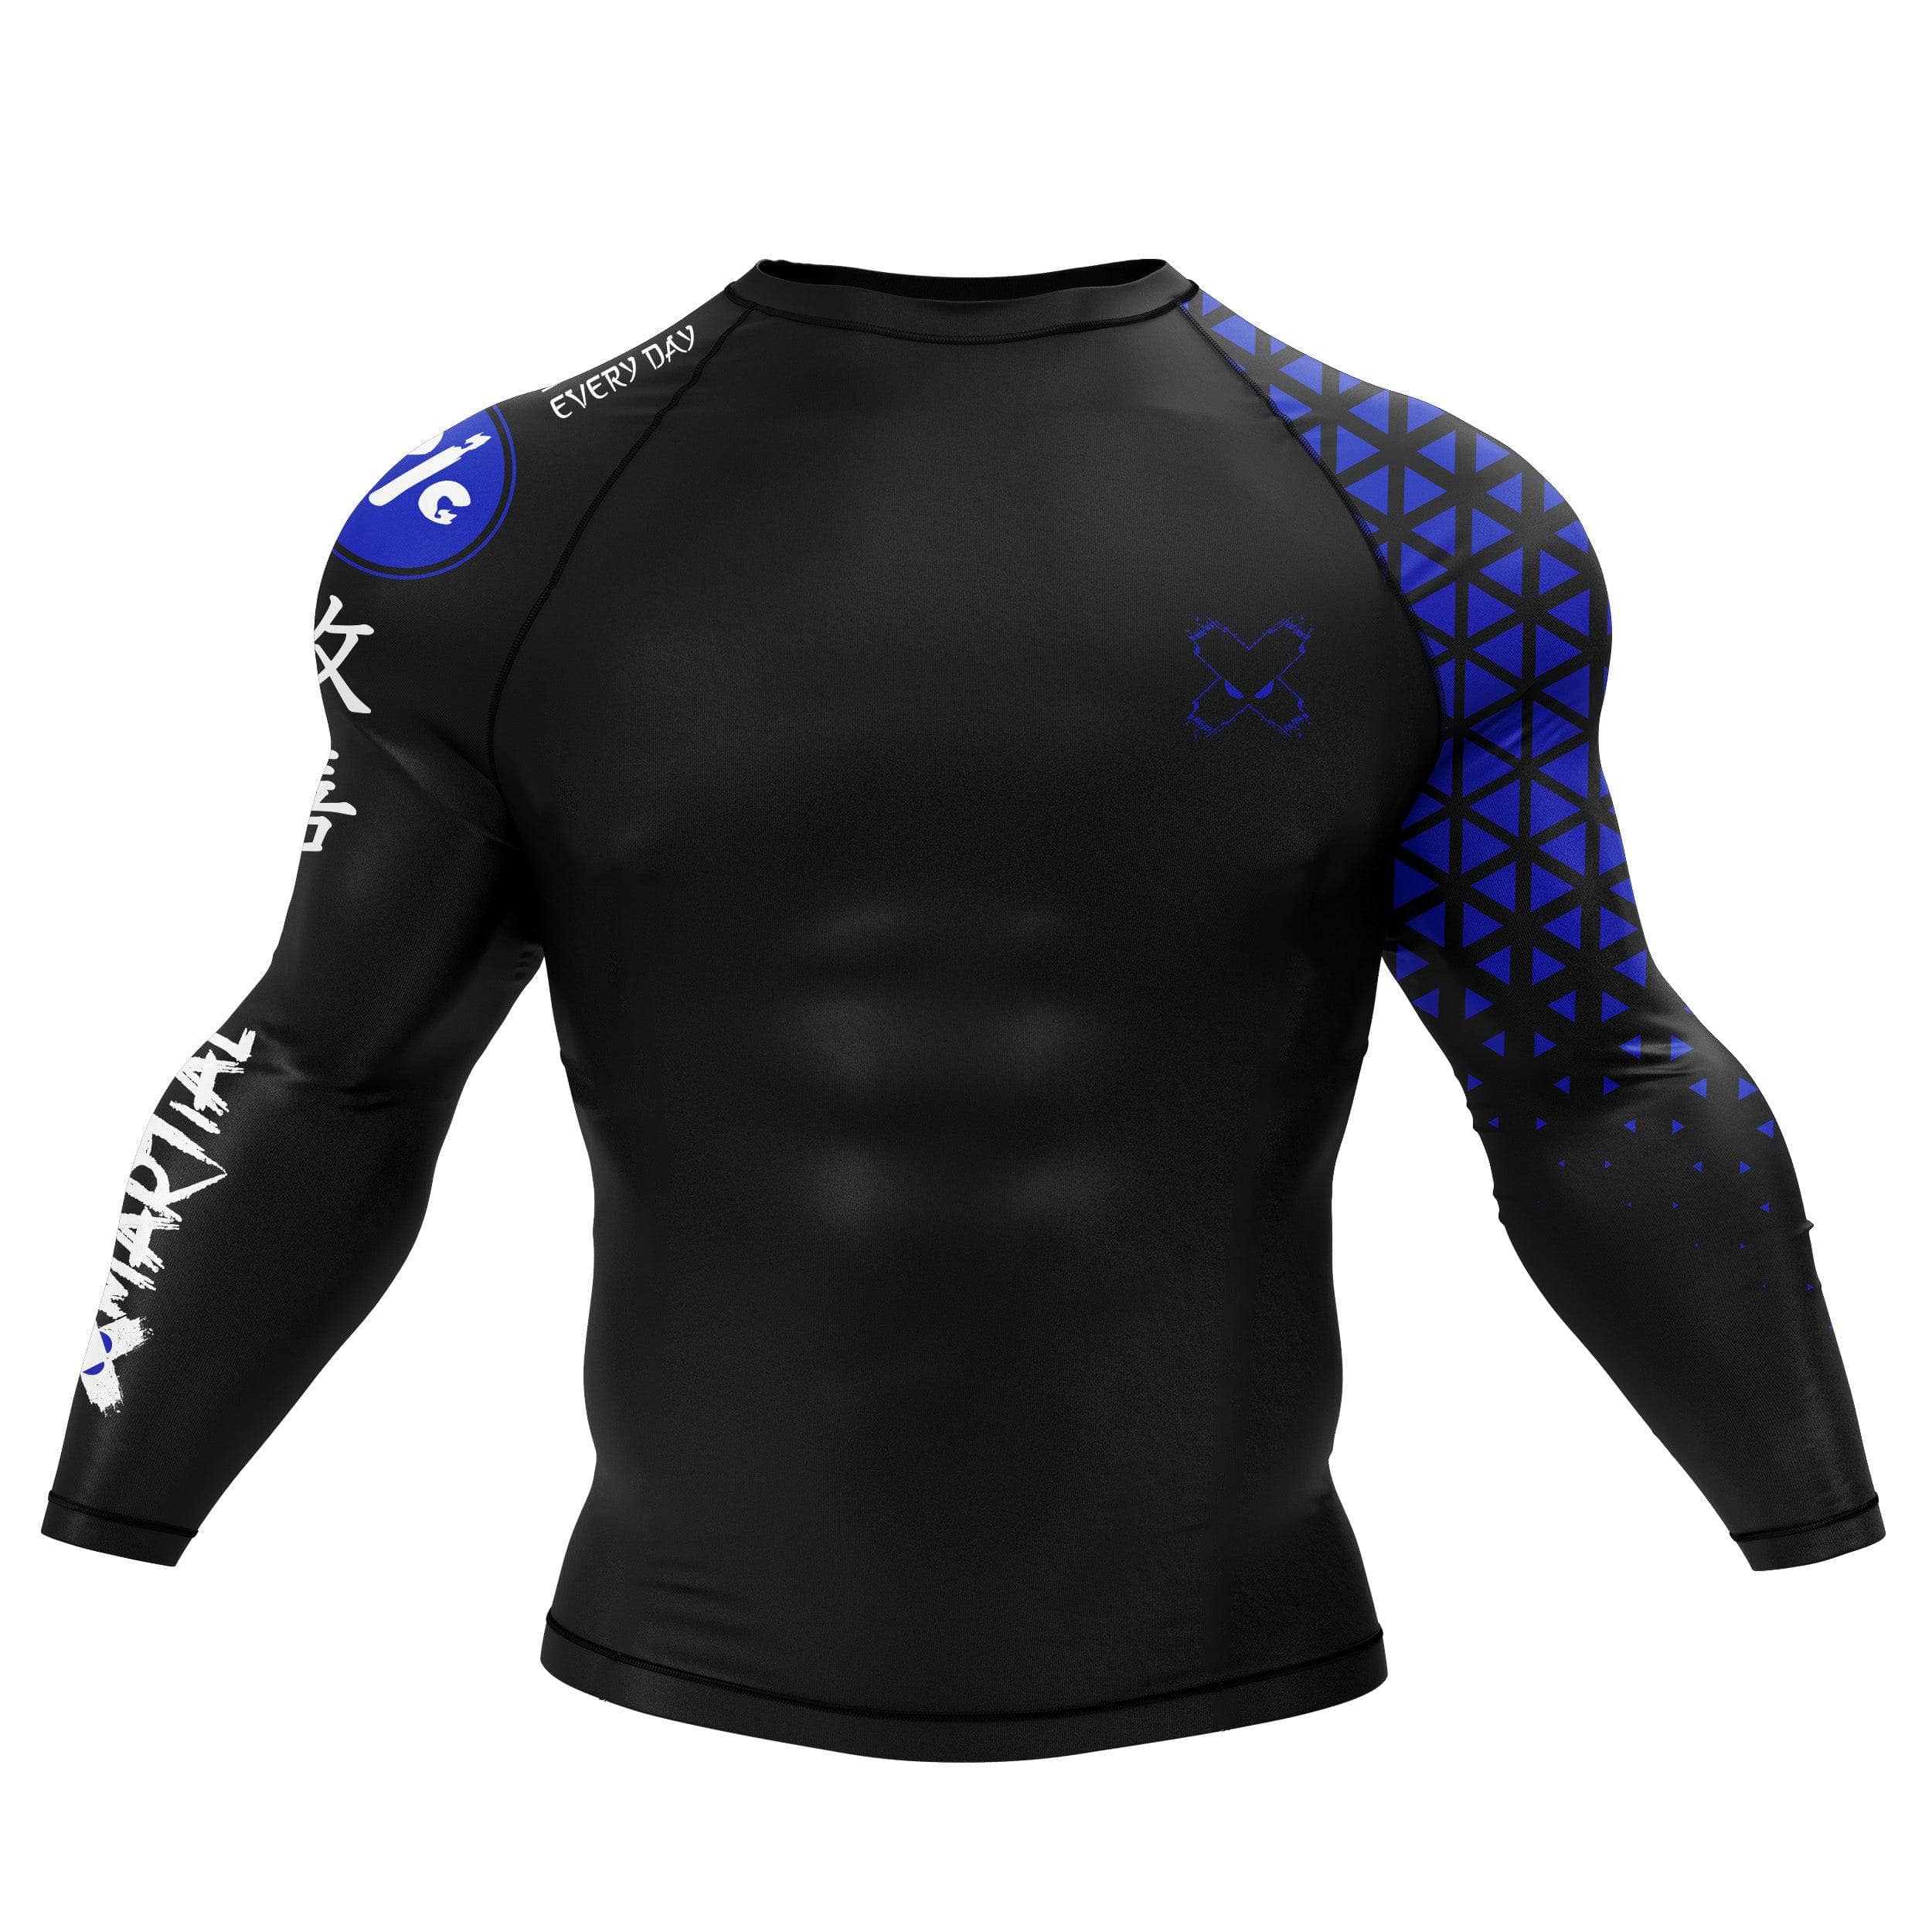 Best Sellers: The best items in Men's Watersport Rash Guards  based on  customer purchases